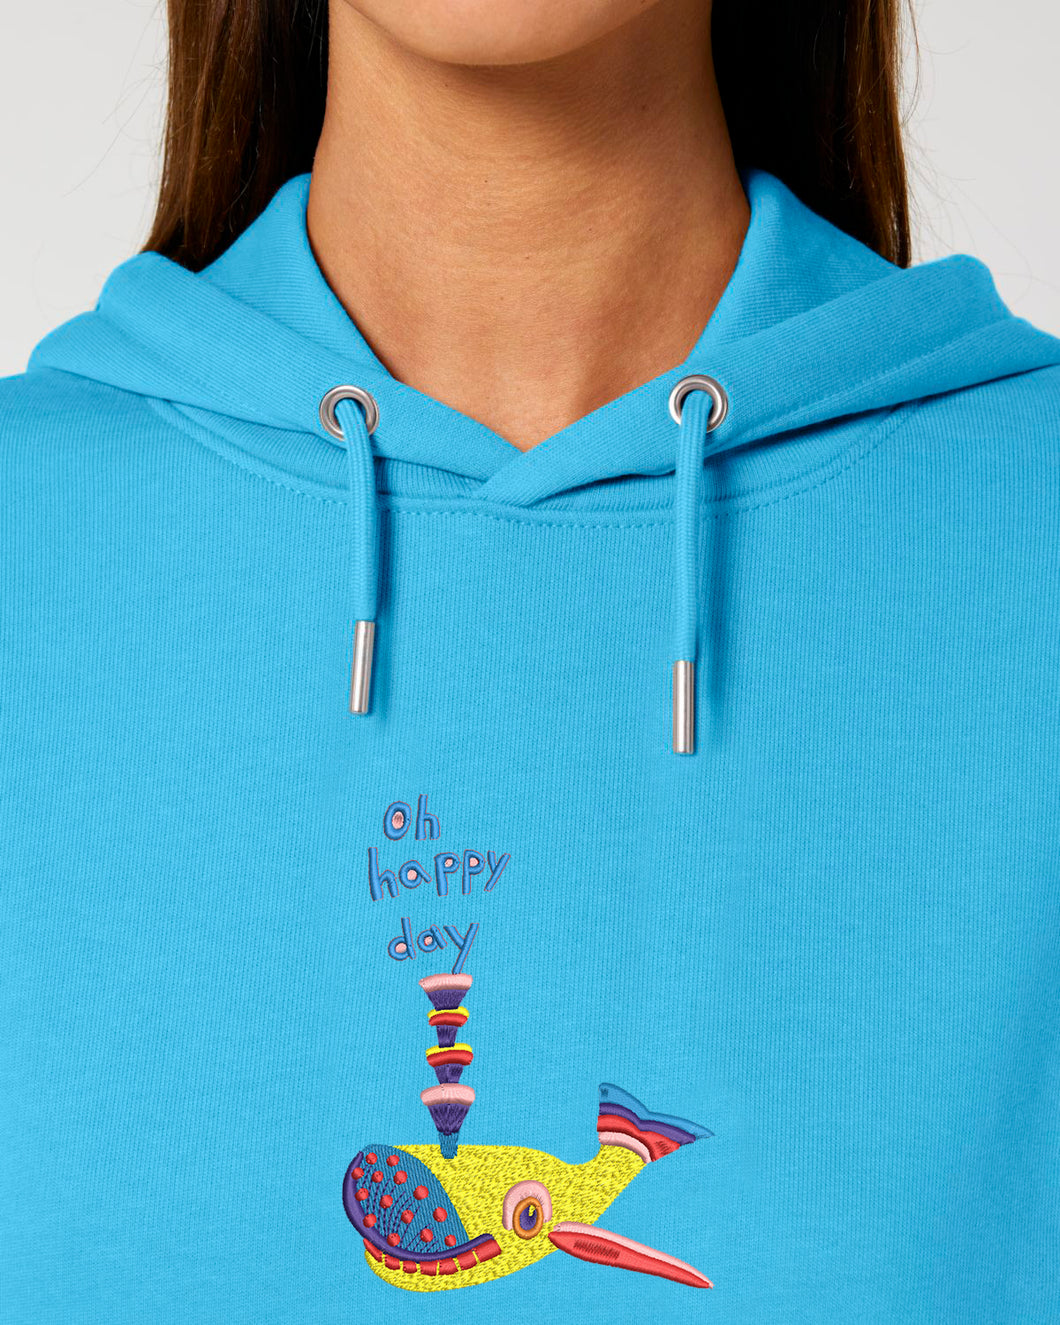 NEW - Oh happy day! 🐳 - Embroidered UNISEX hoodie